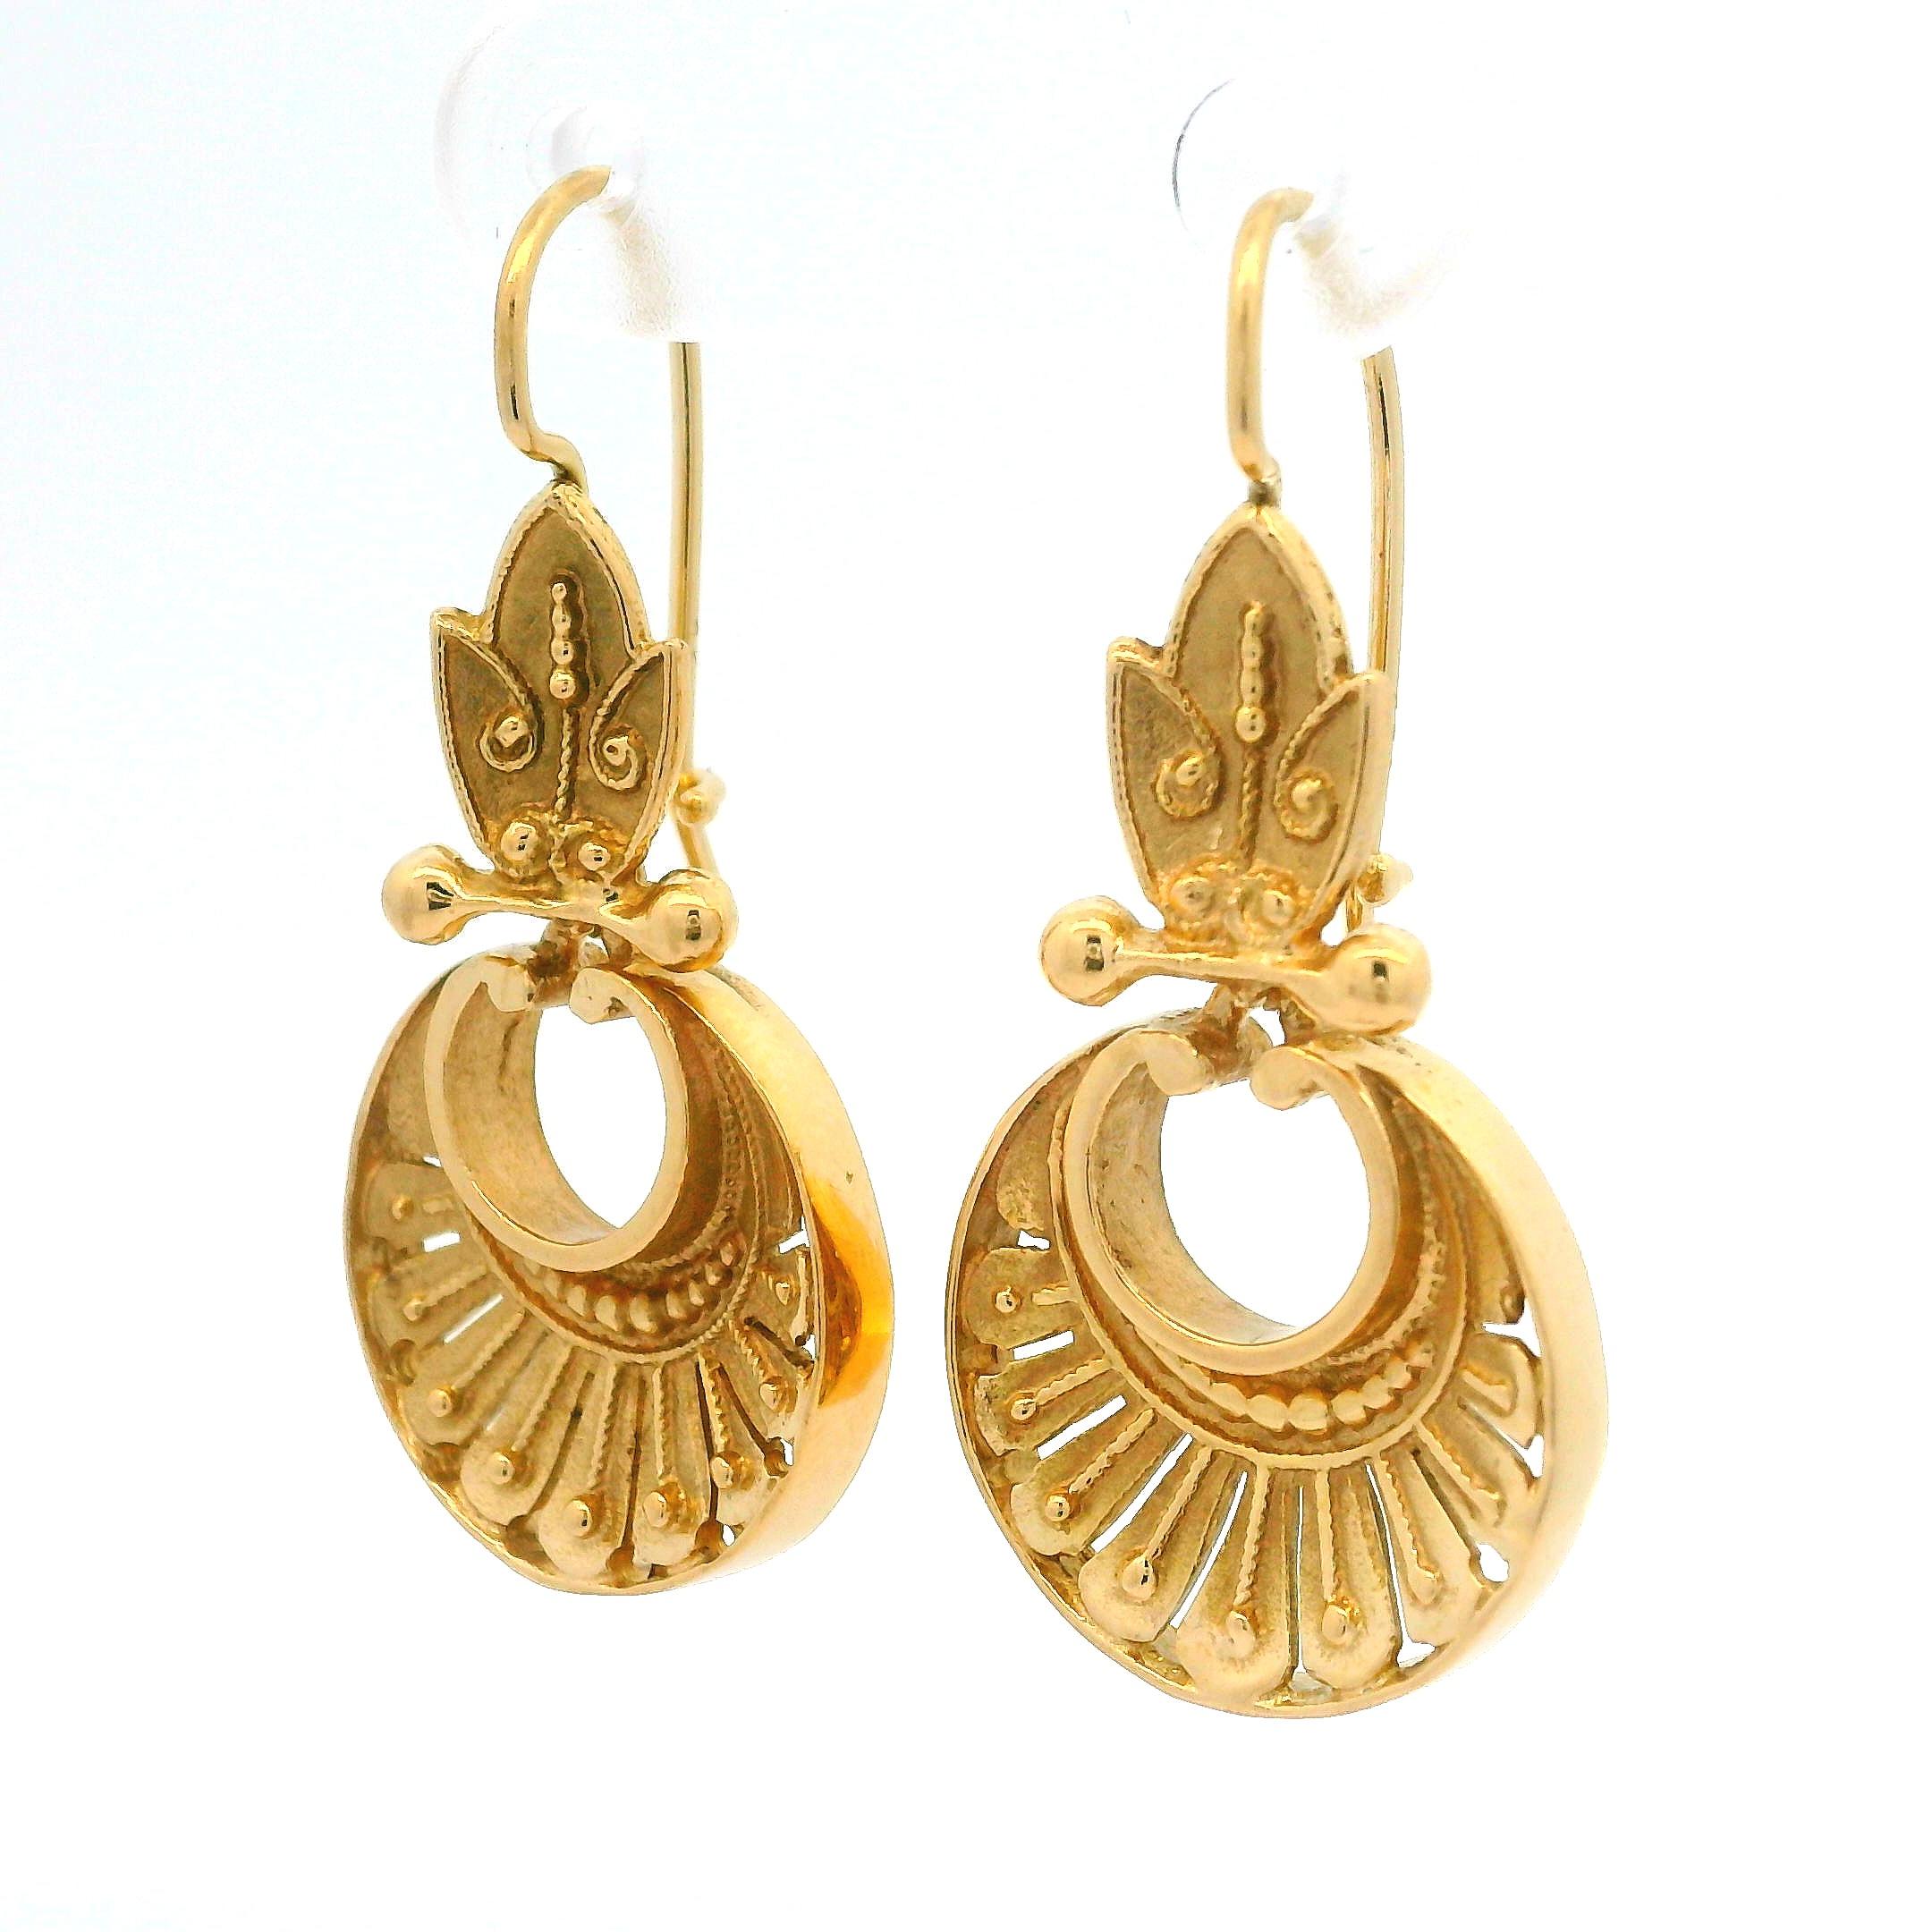 Material: Solid 14k Yellow Gold
Weight: 6.41 Grams
Backing: Hook Closure (Pierced ears are required.)
Overall Width: 15.69mm (0.61